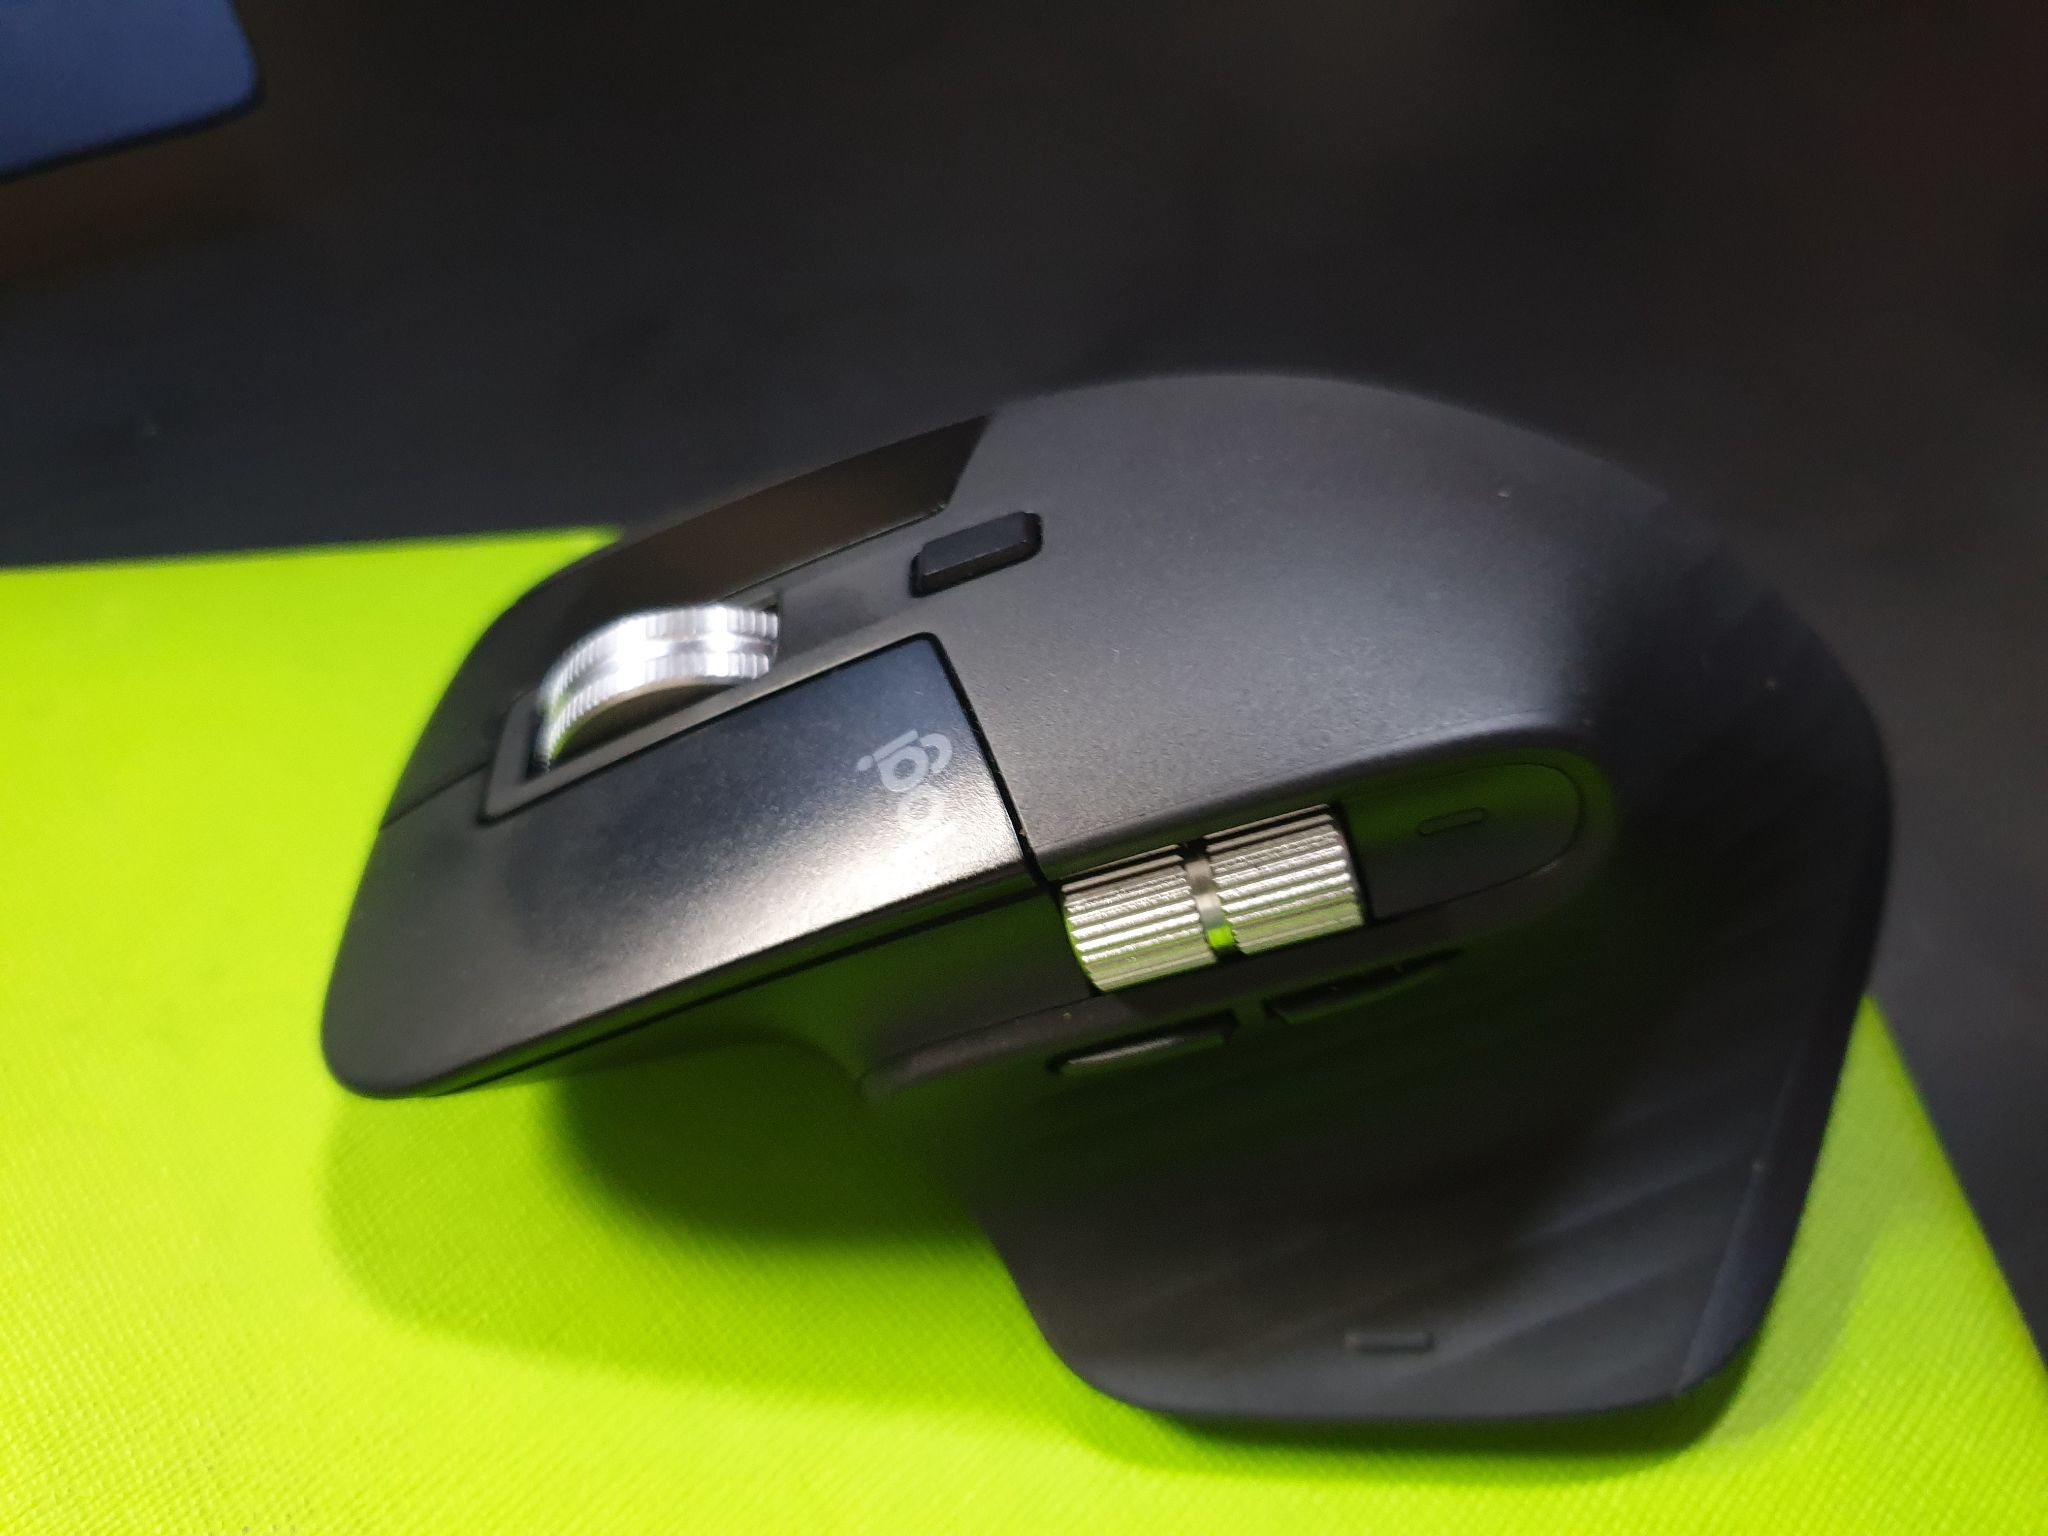 Close up profile picture of the Logitech MX Master 3 mouse with horizontal scroll wheel.